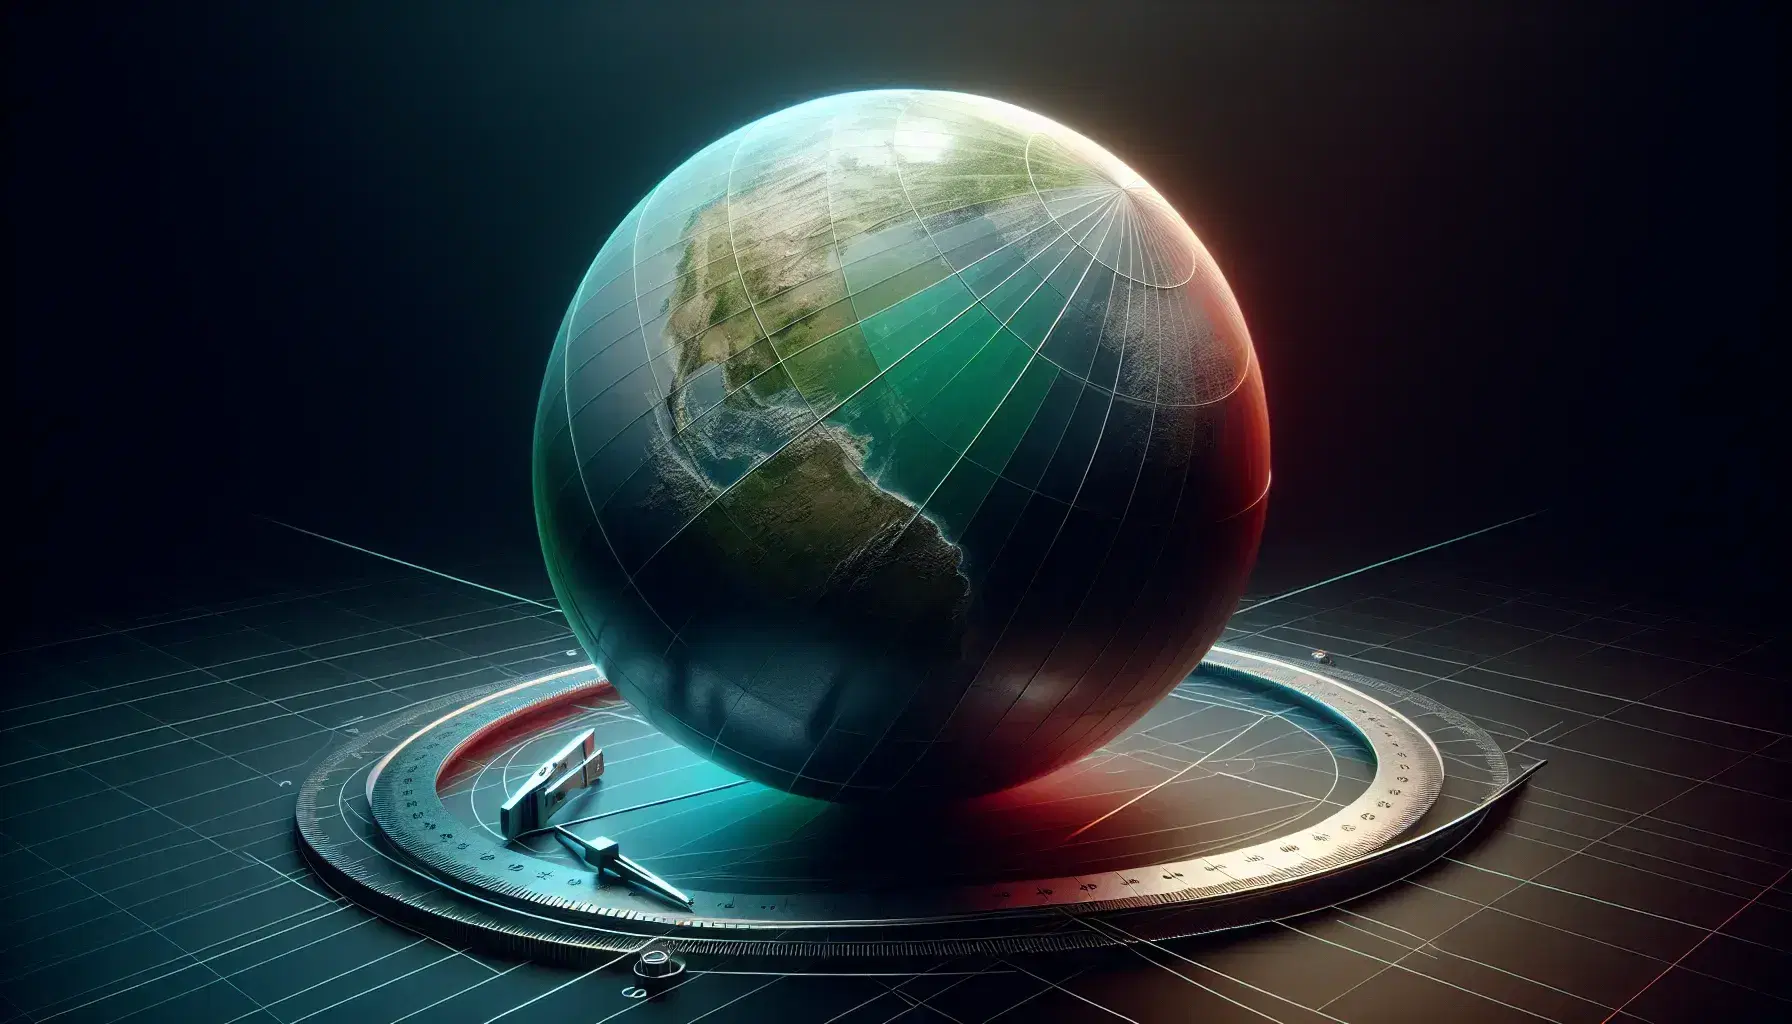 3D-rendered globe with land and water textures, illuminated on one side, encircled by intersecting red, green, and blue planes, with blurred measuring tools in the foreground.